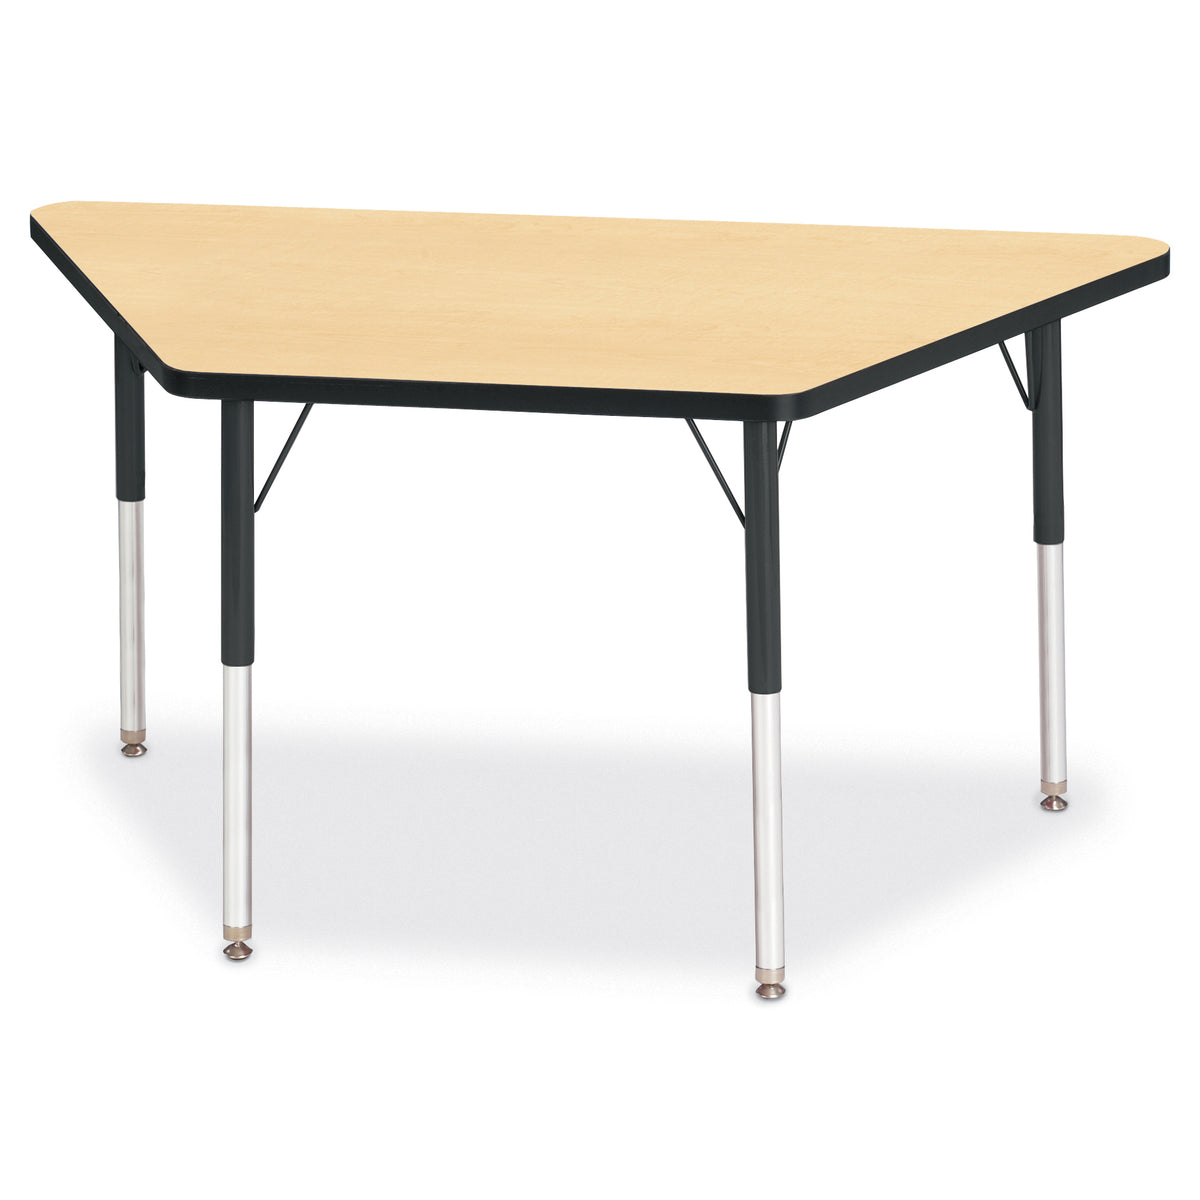 6438JCA011, Berries Trapezoid Activity Tables - 24" X 48", A-height - Maple/Black/Black